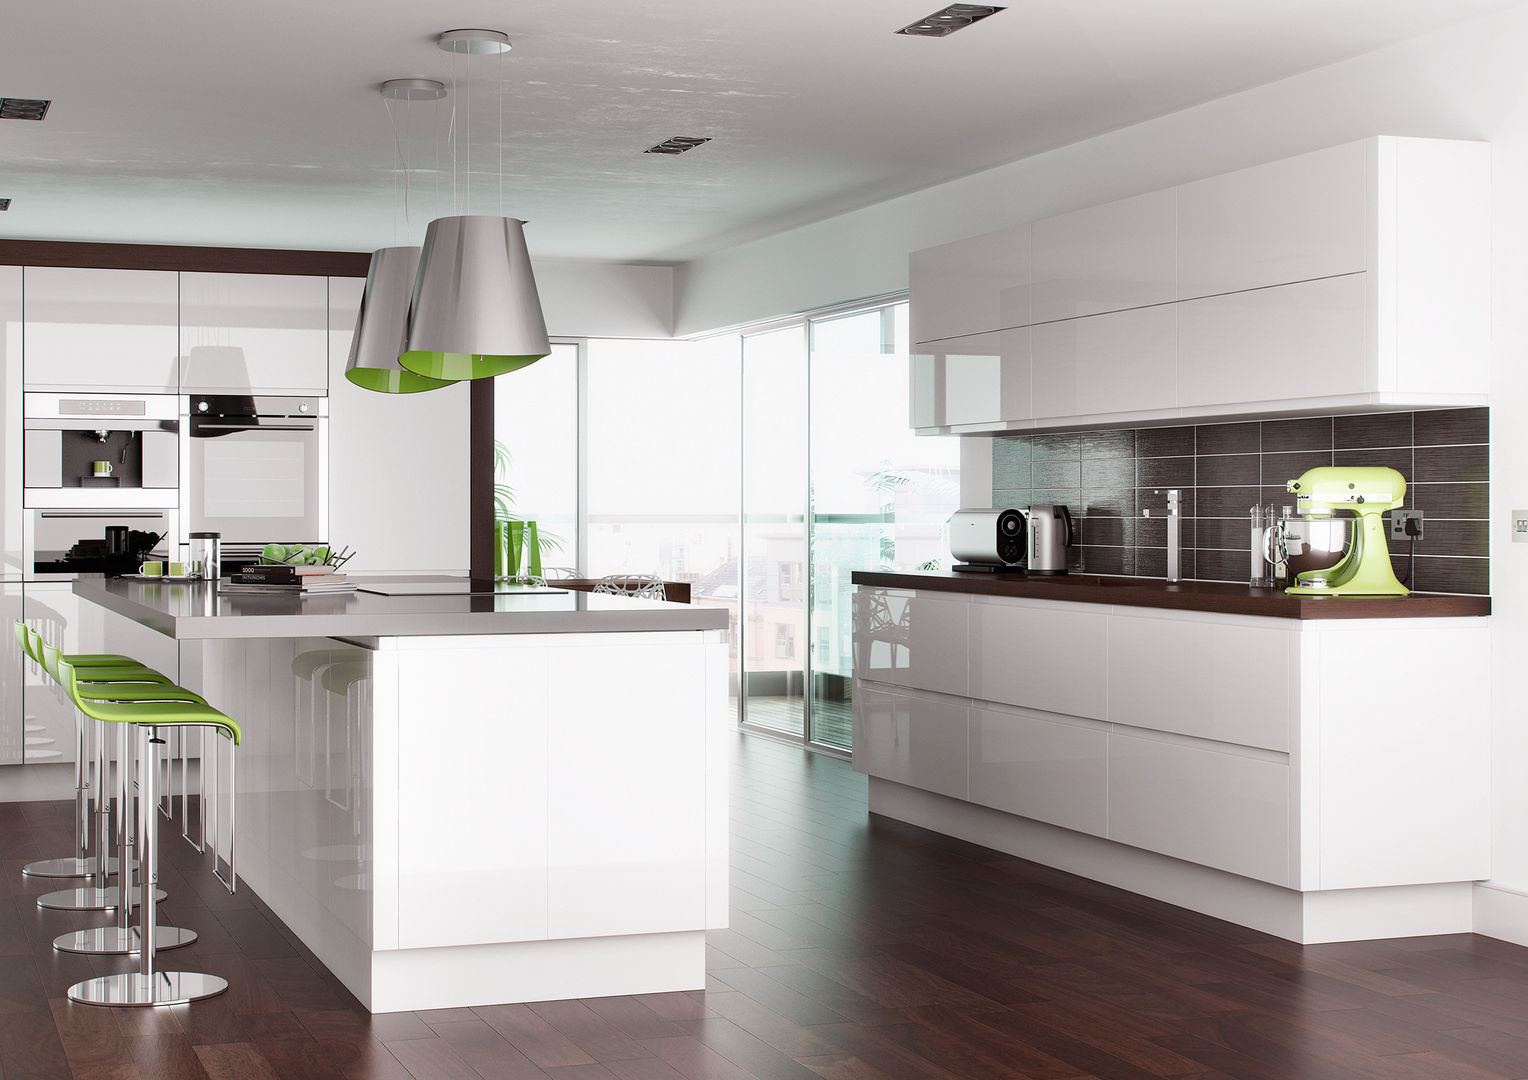 Lucente Gloss White Fitted Kitchens London Metro Wardrobes London مطبخ Cabinets & shelves